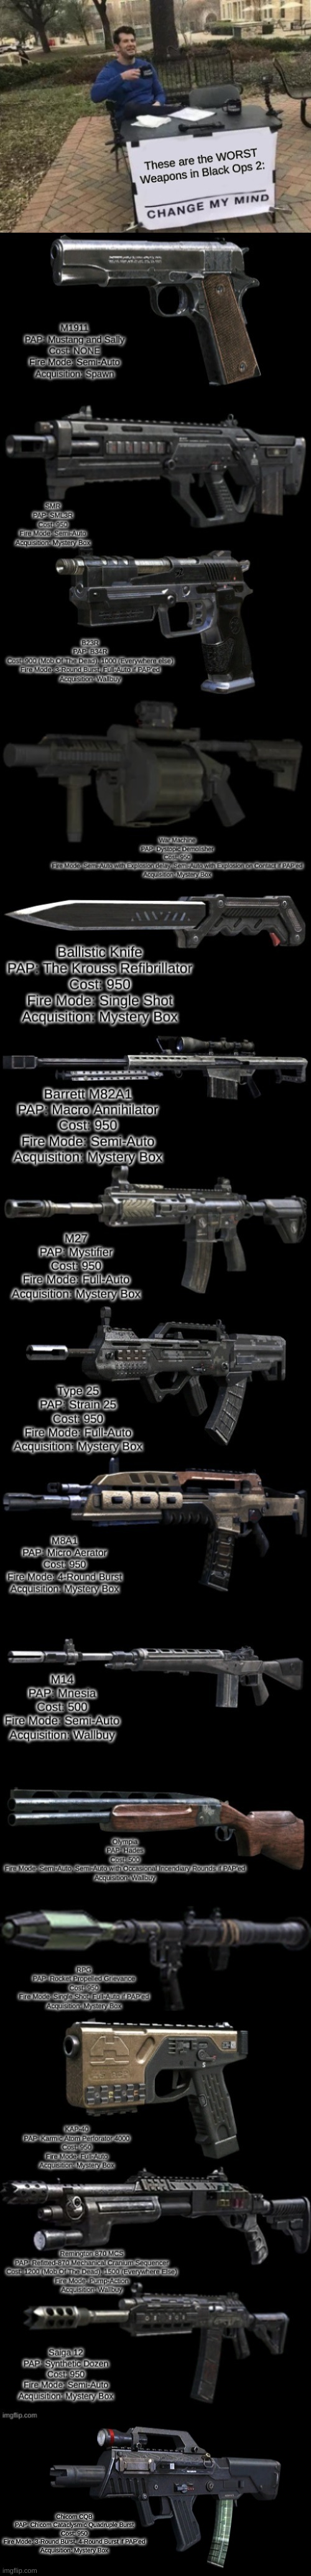 Worst Weapons in BO2 Zombies | Chicom CQB
PAP: Chicom Cataclysmic Quadruple Burst
Cost: 950
Fire Mode: 3-Round Burst, 4-Round Burst if PAP'ed
Acquisition: Mystery Box | image tagged in call of duty | made w/ Imgflip meme maker